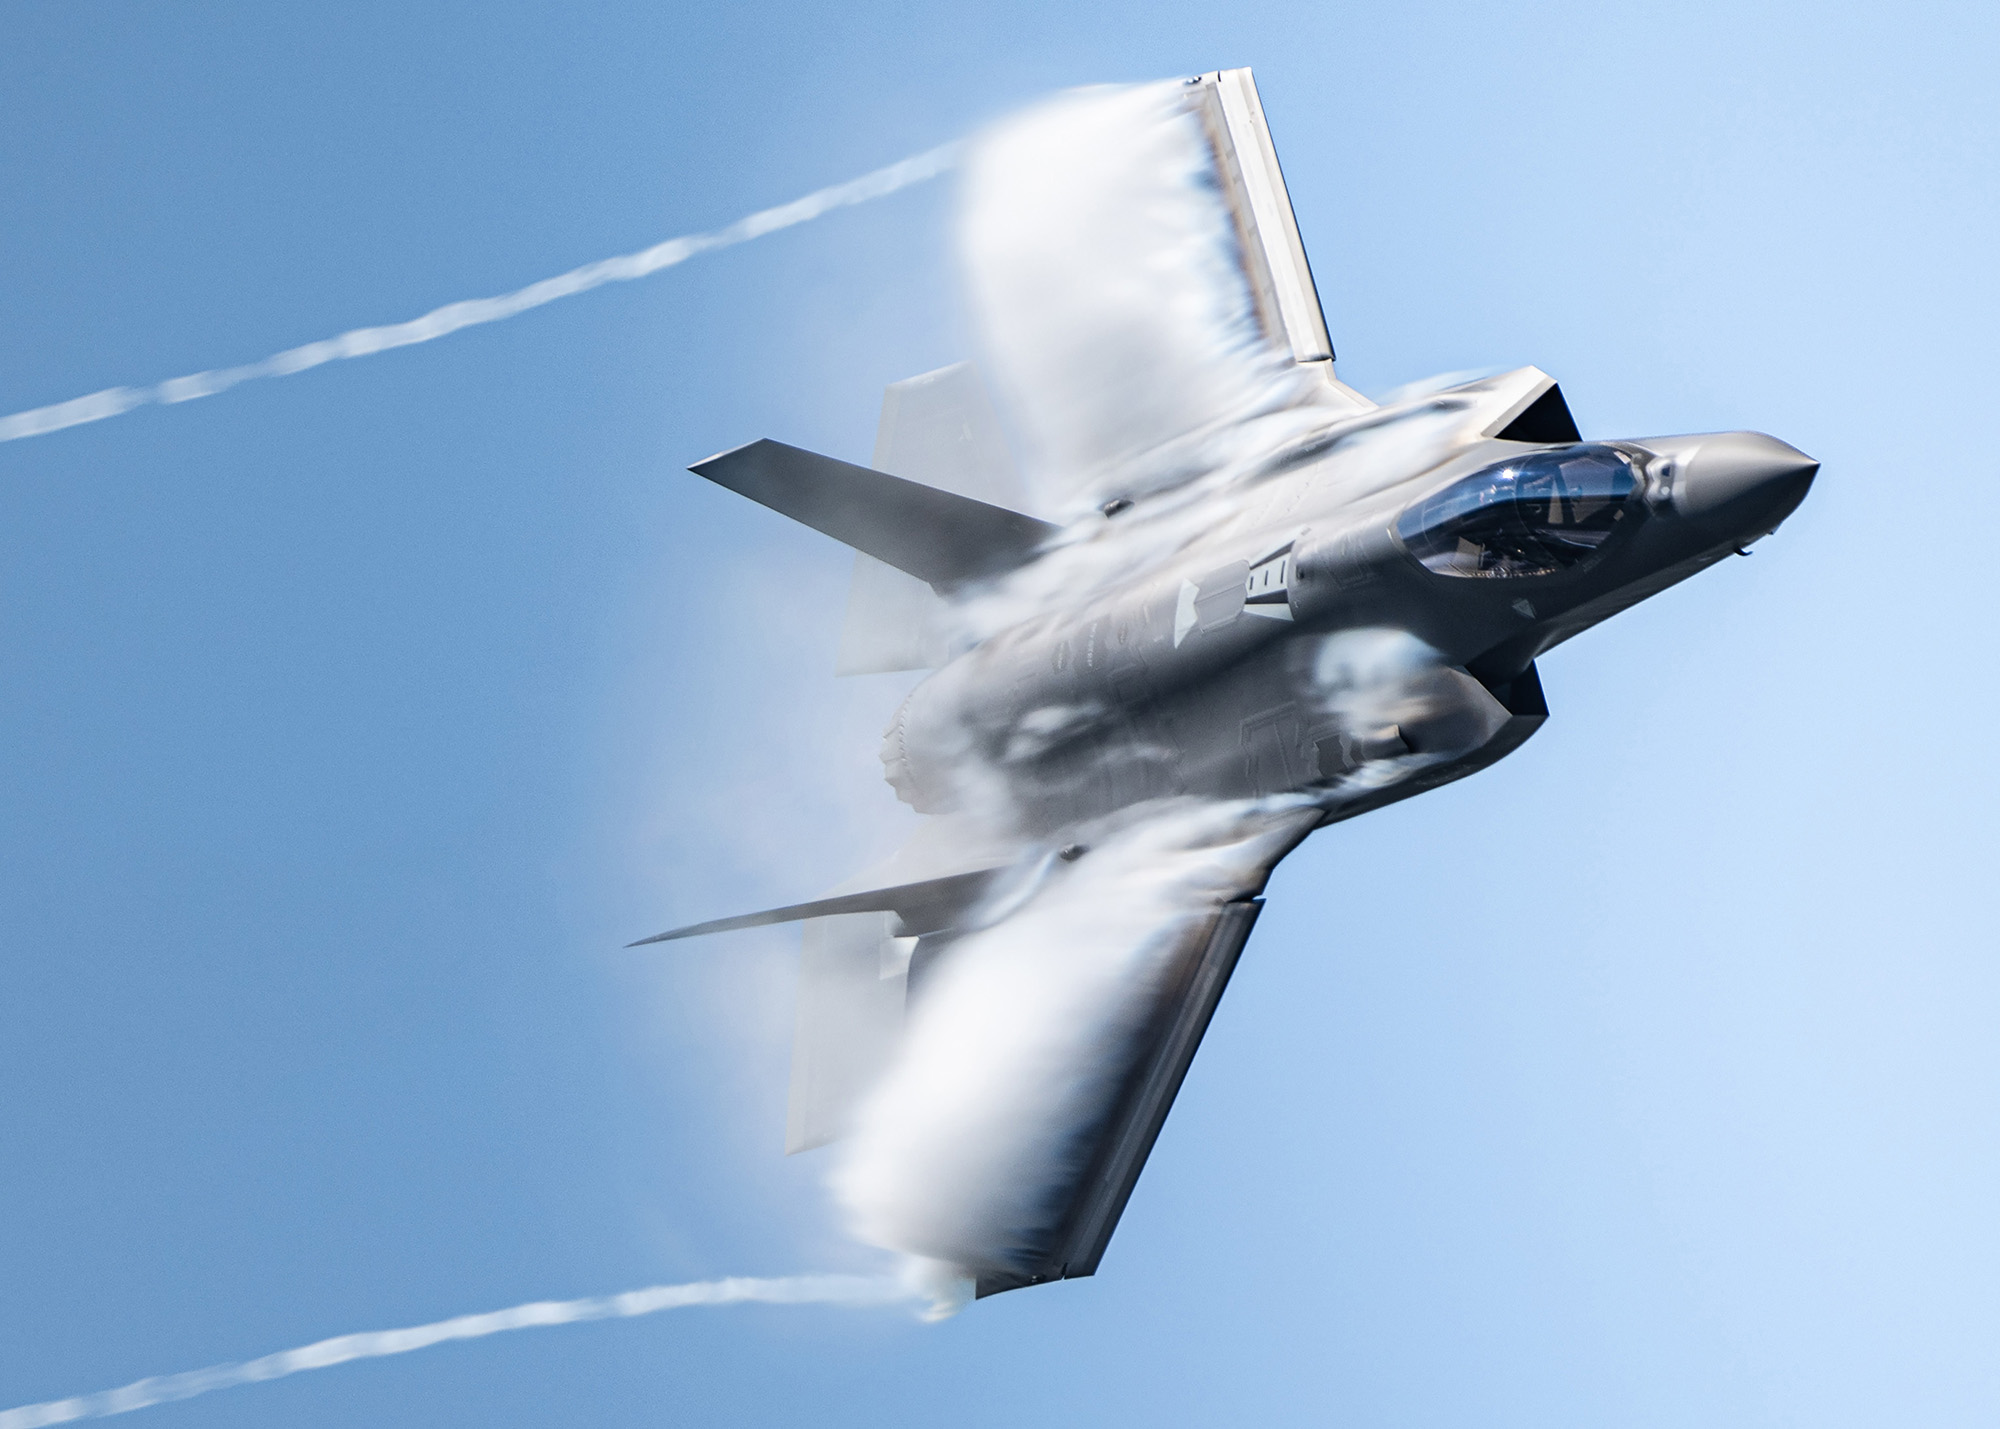 Now Is Not the Time to Go Weak on the F-35